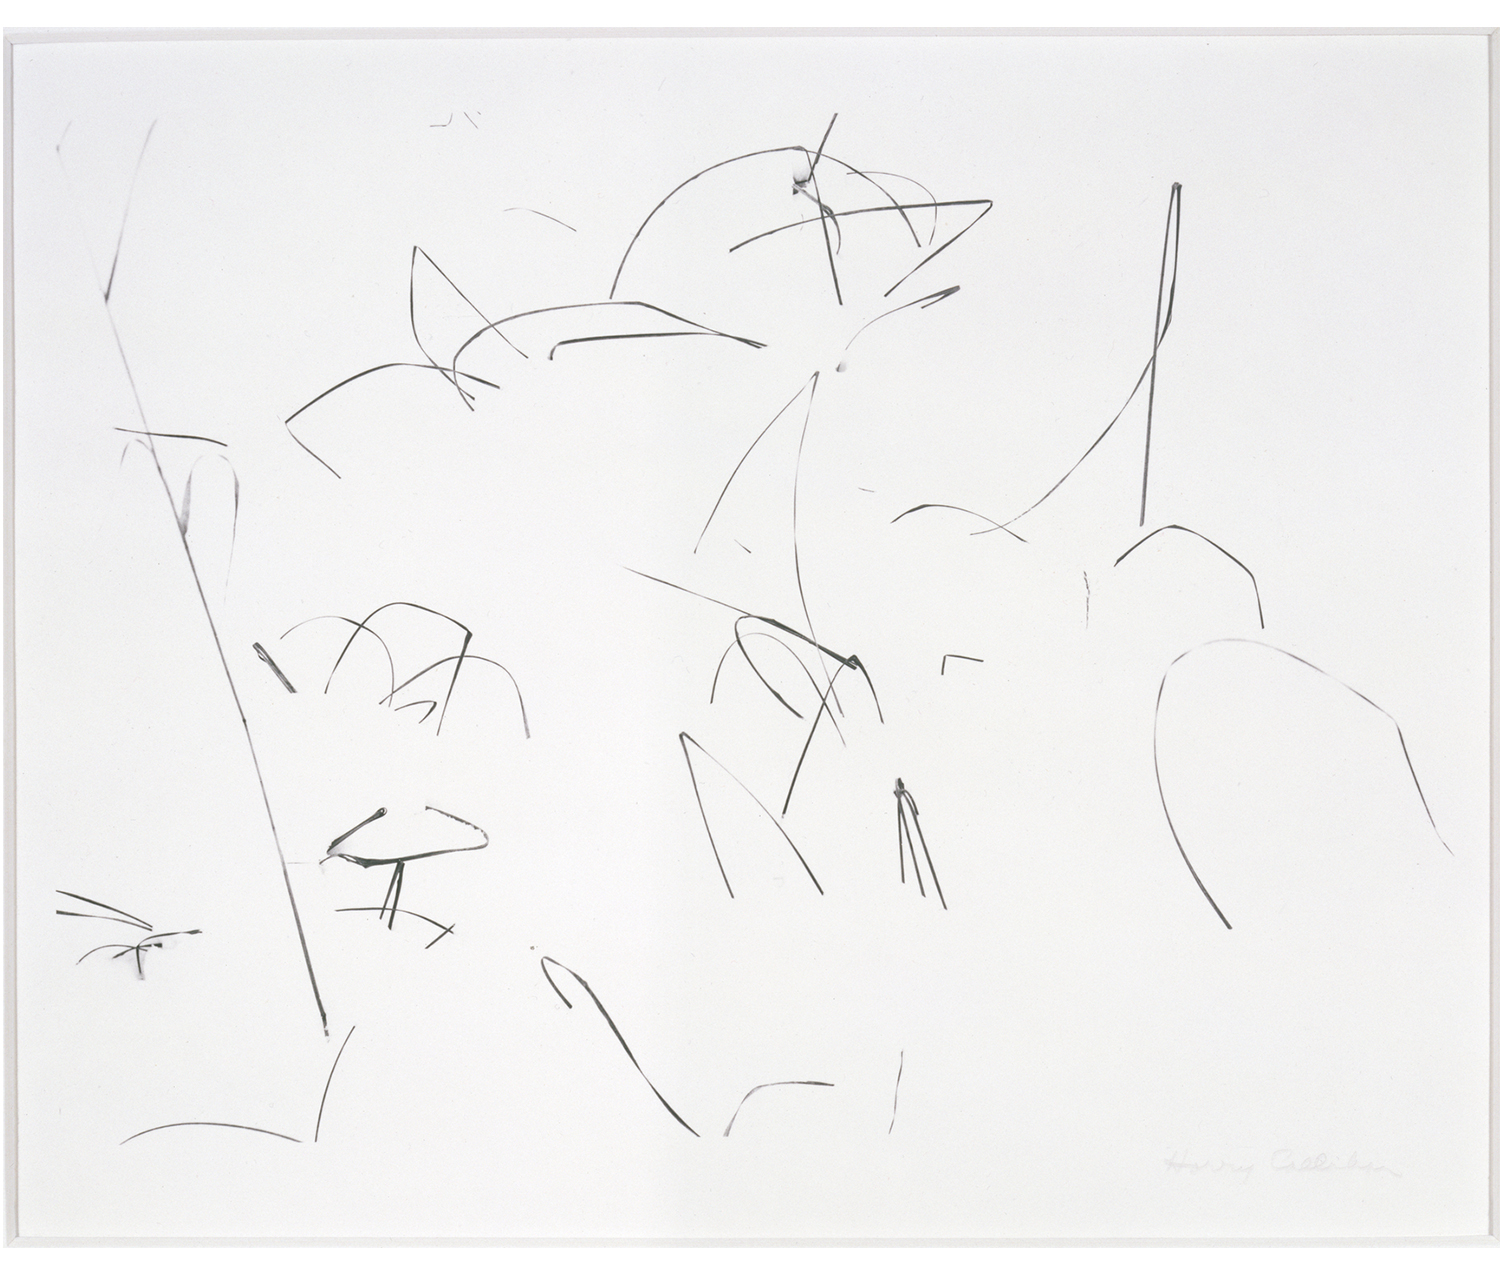 abstract drawing of black lines against a white background, representing grass sticking up in the snow